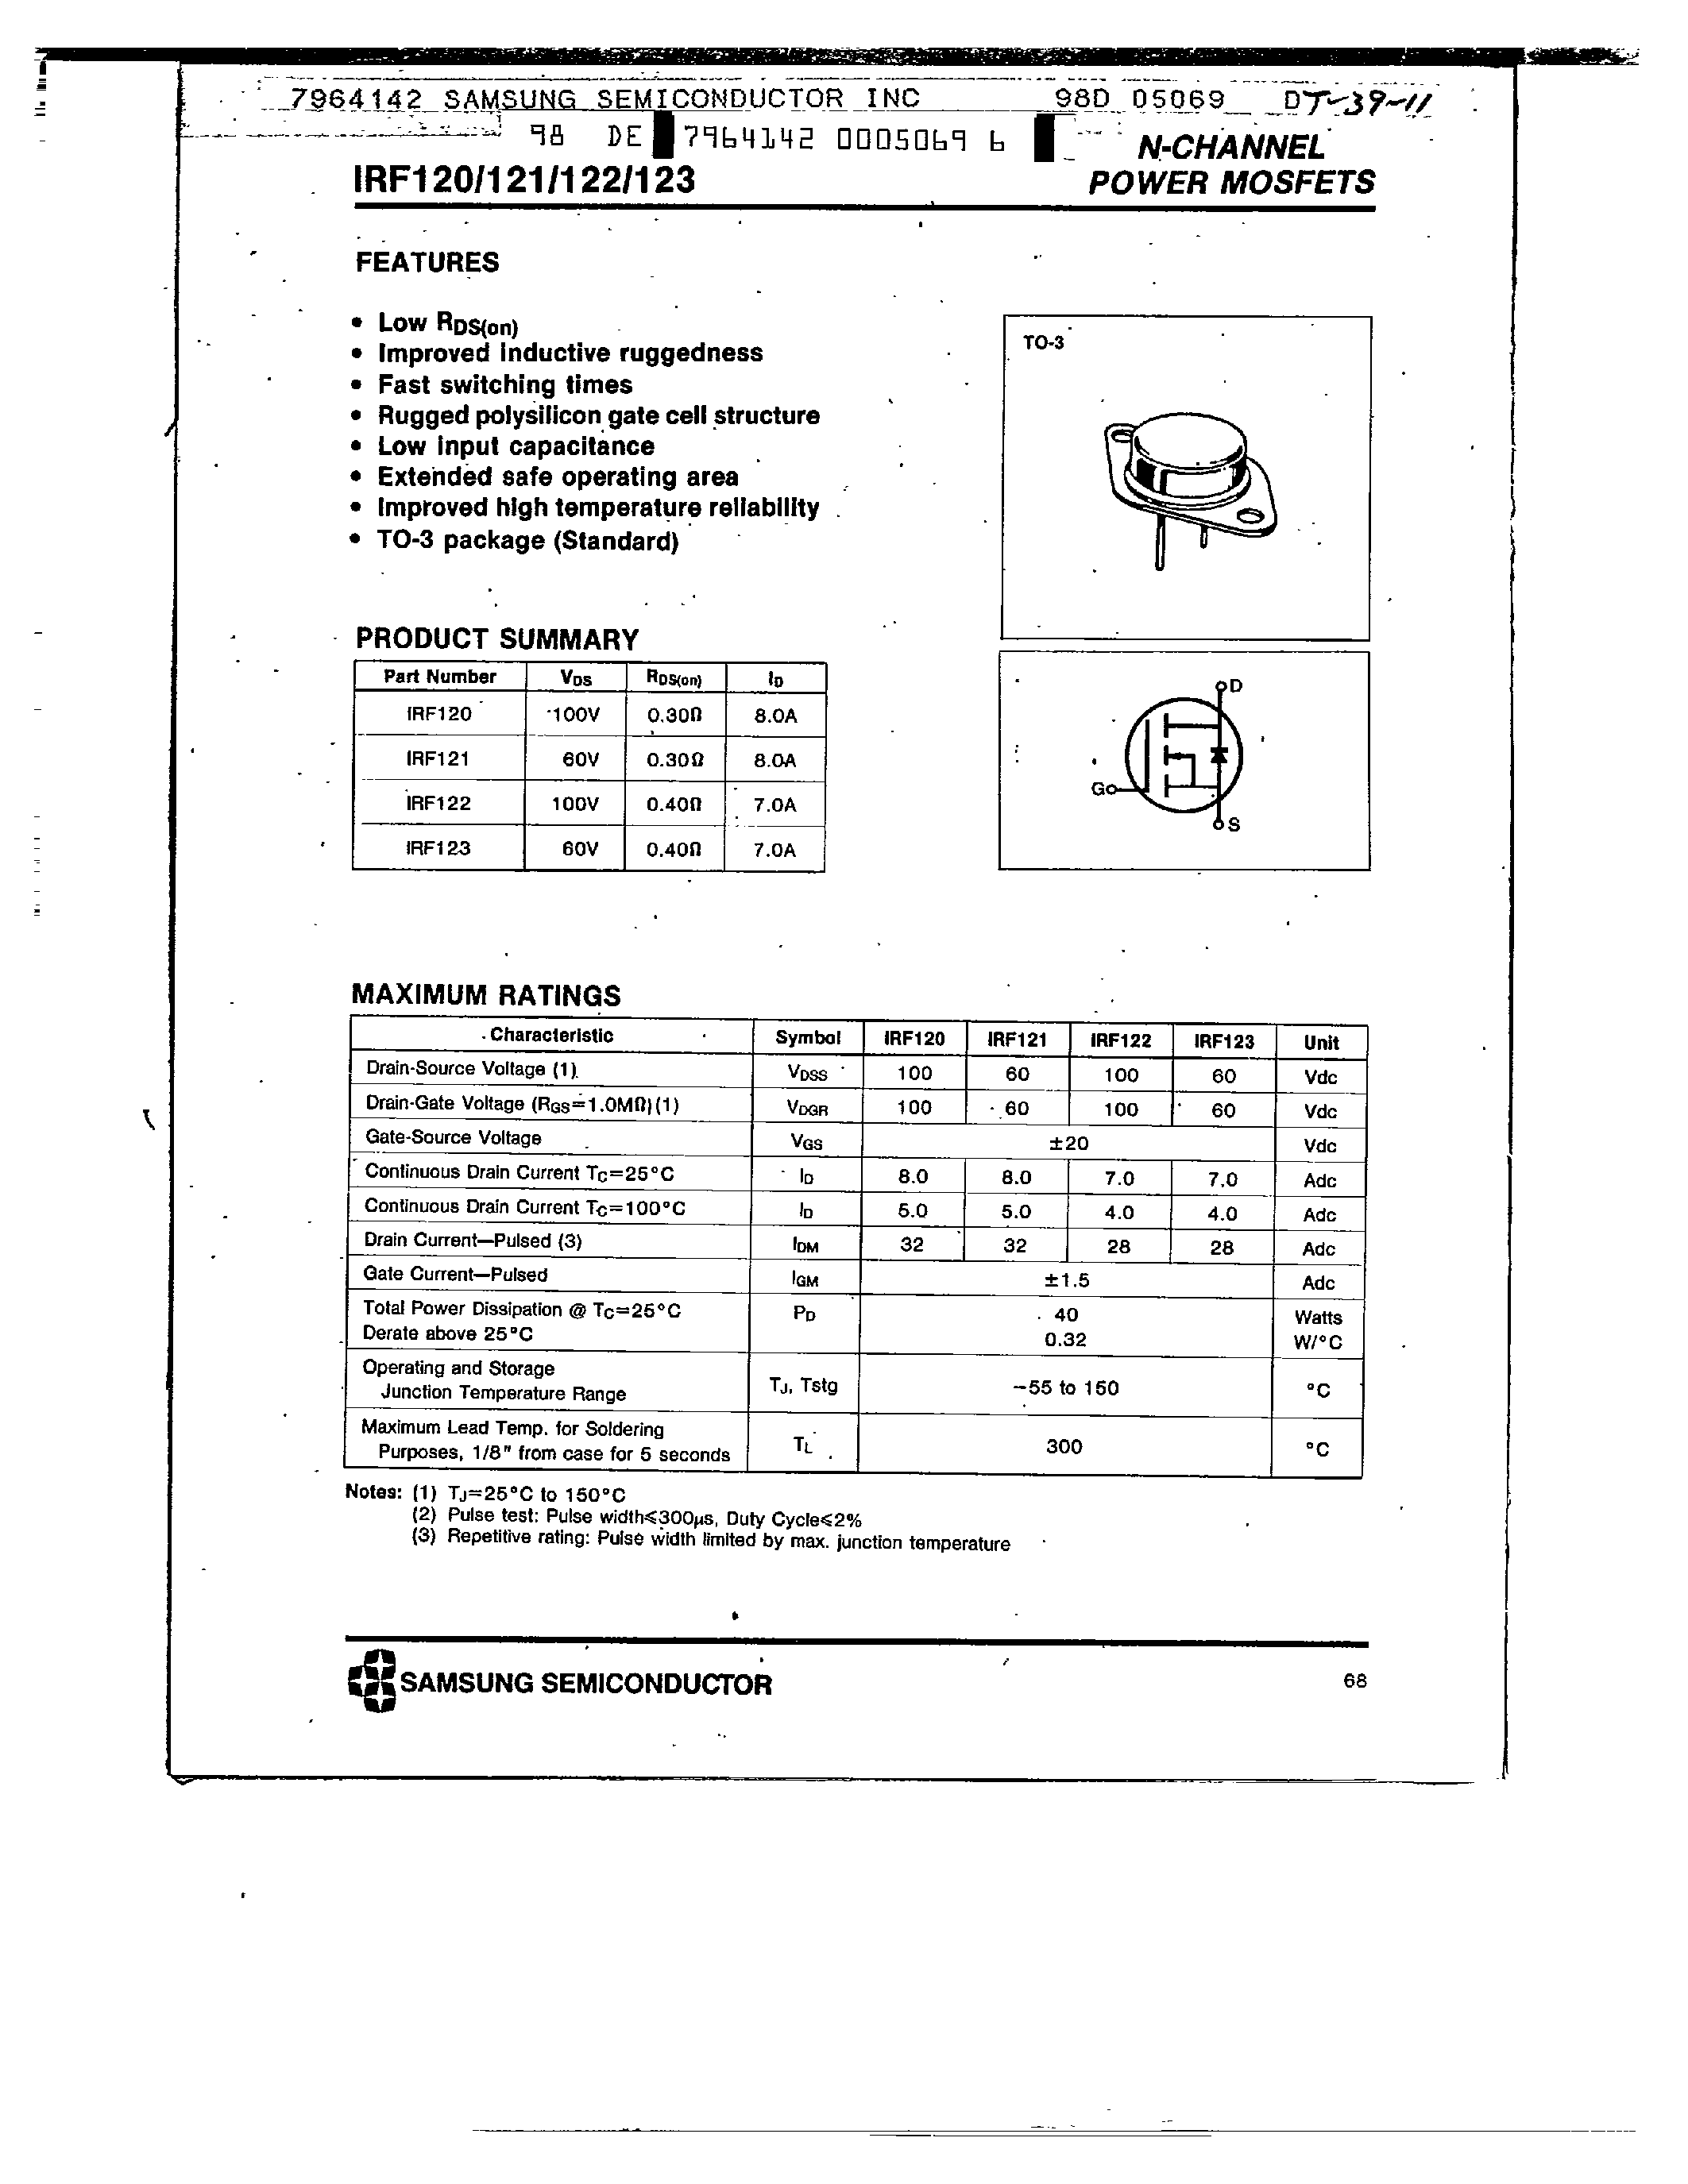 Datasheet IRF122 - N-CHANNEL POWER MOSFETS page 1